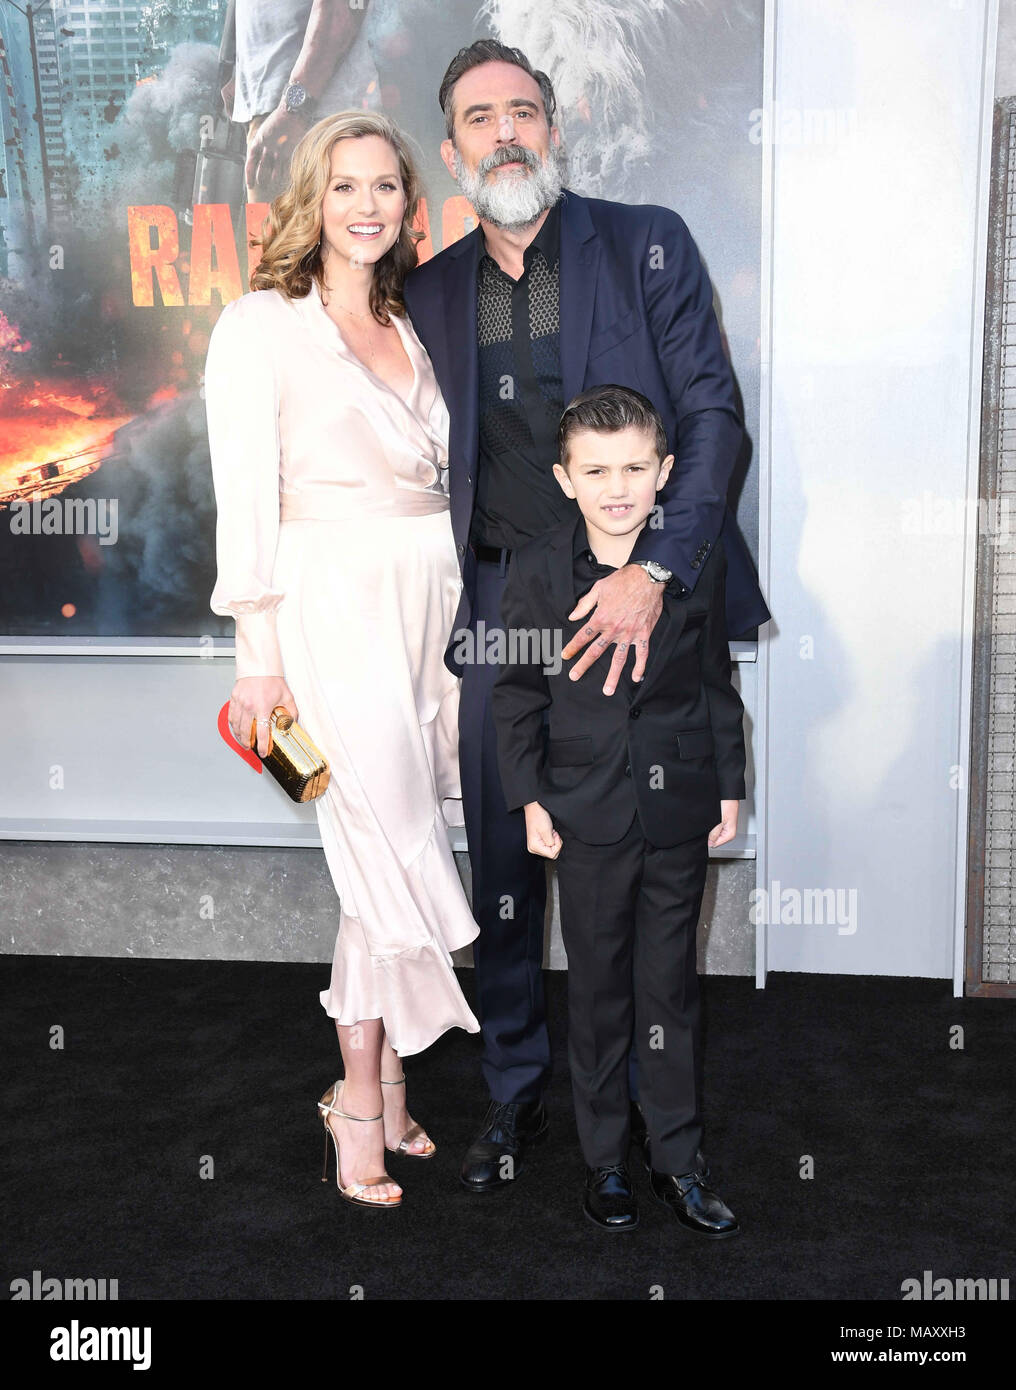 LOS ANGELES - APR 4: Hilarie Burton at the Rampage Premiere at Microsoft  Theater on April 4, 2018 in Los Angeles, CA Stock Photo - Alamy